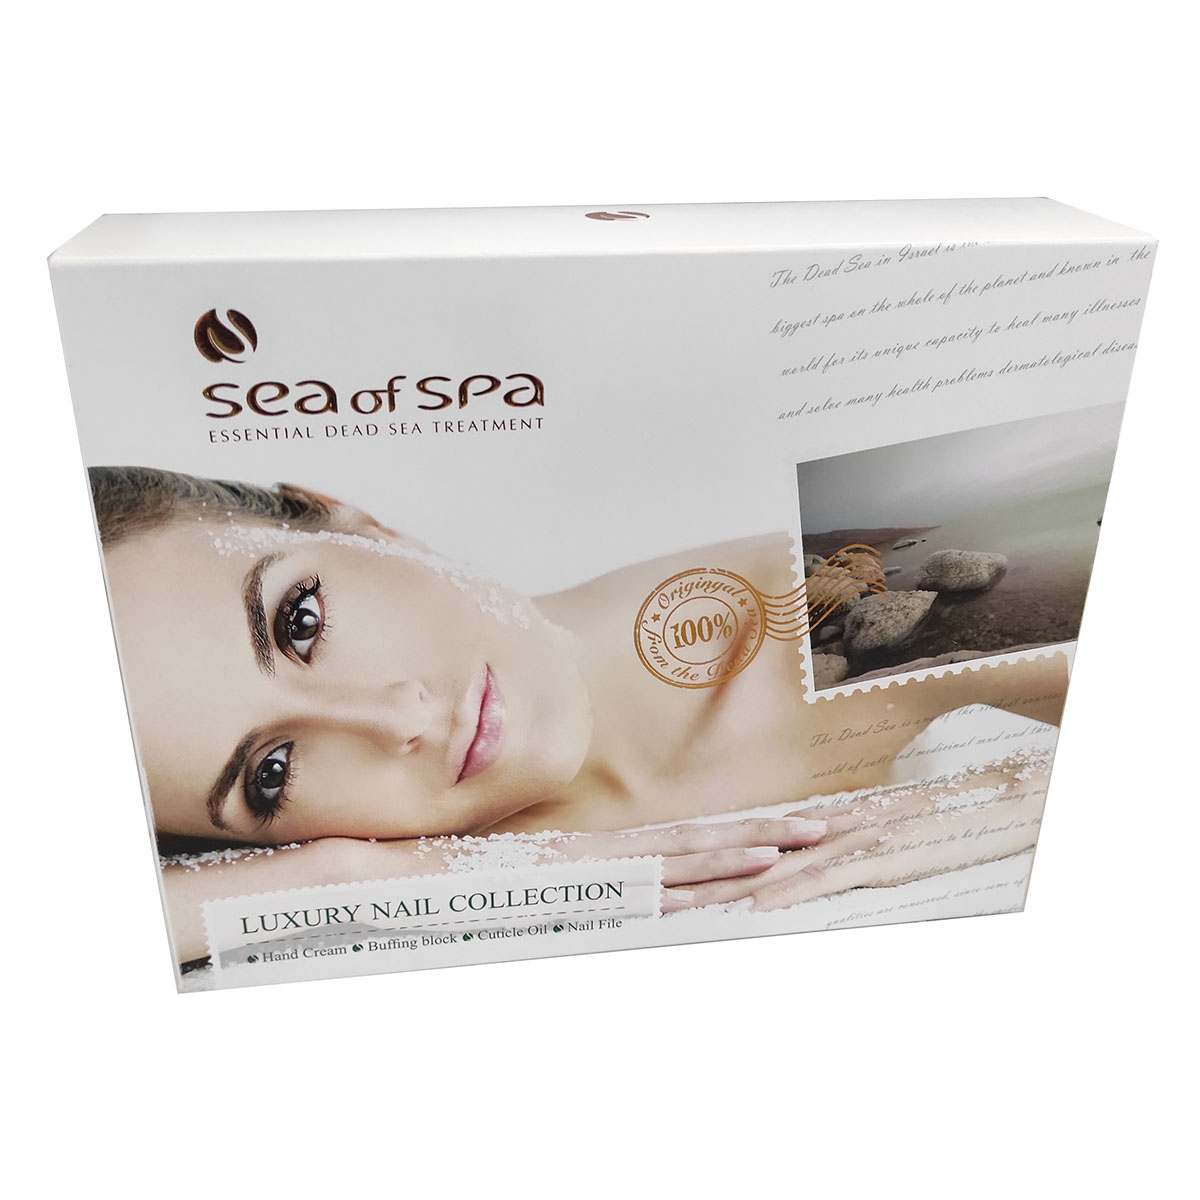 Sea of Spa Luxury Nail Collection Nail Kit – For Strong and Lustrous Nails - 1